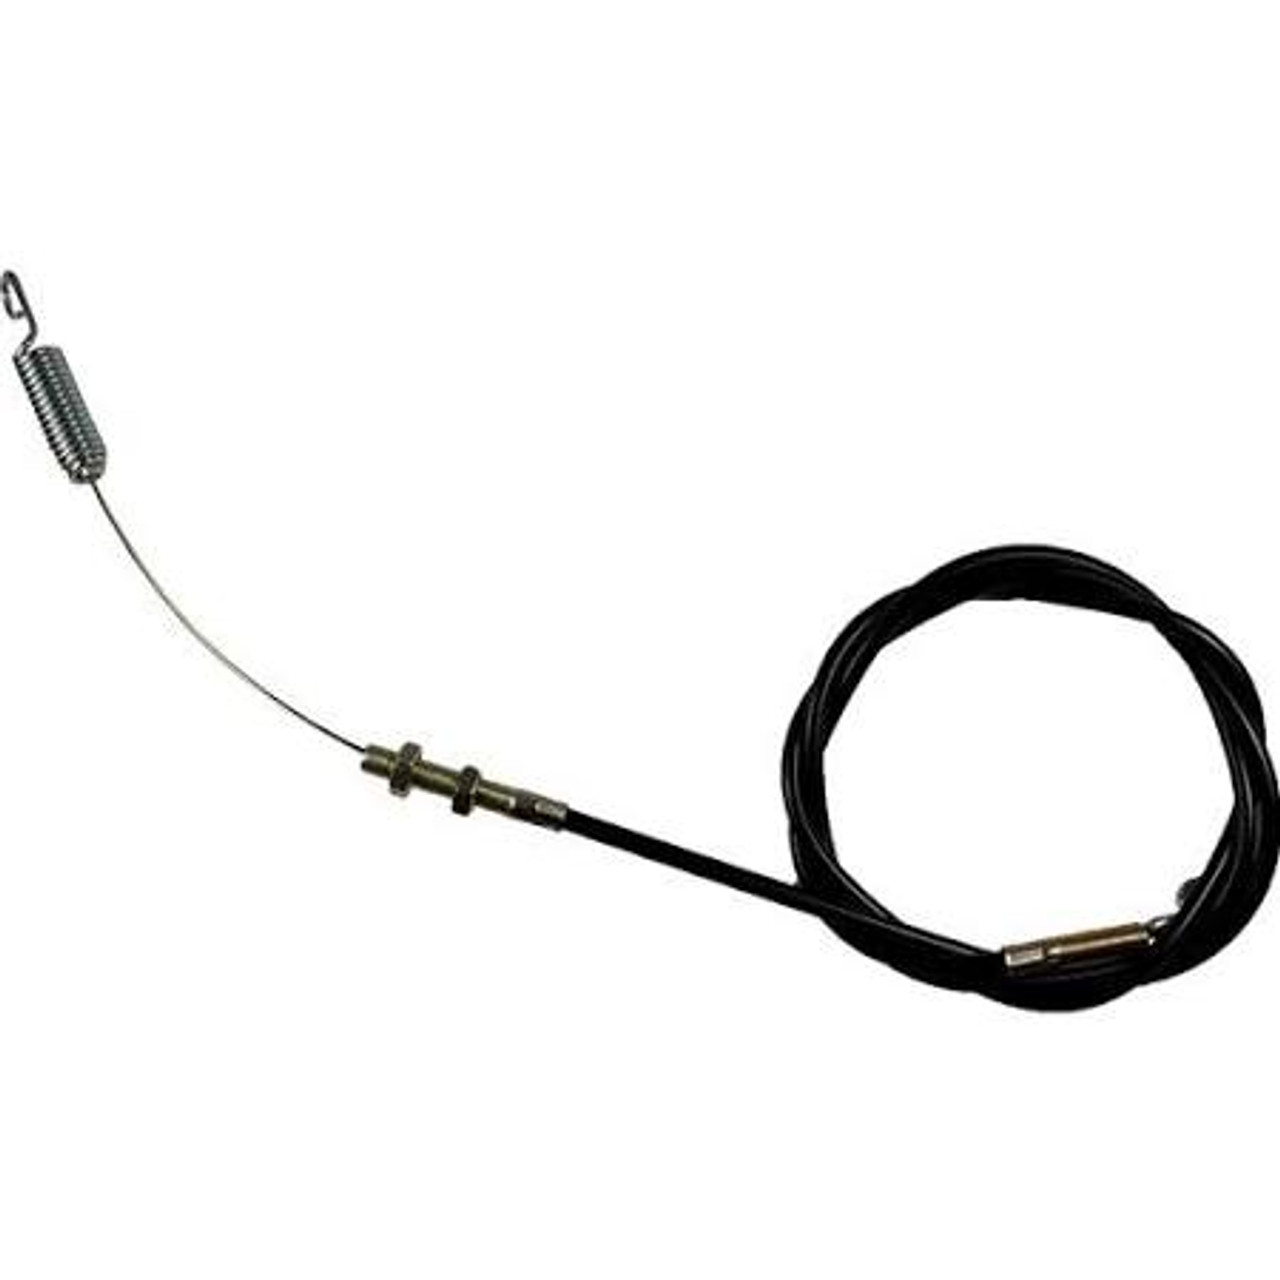 DR Mower 143981 Clutch Cable